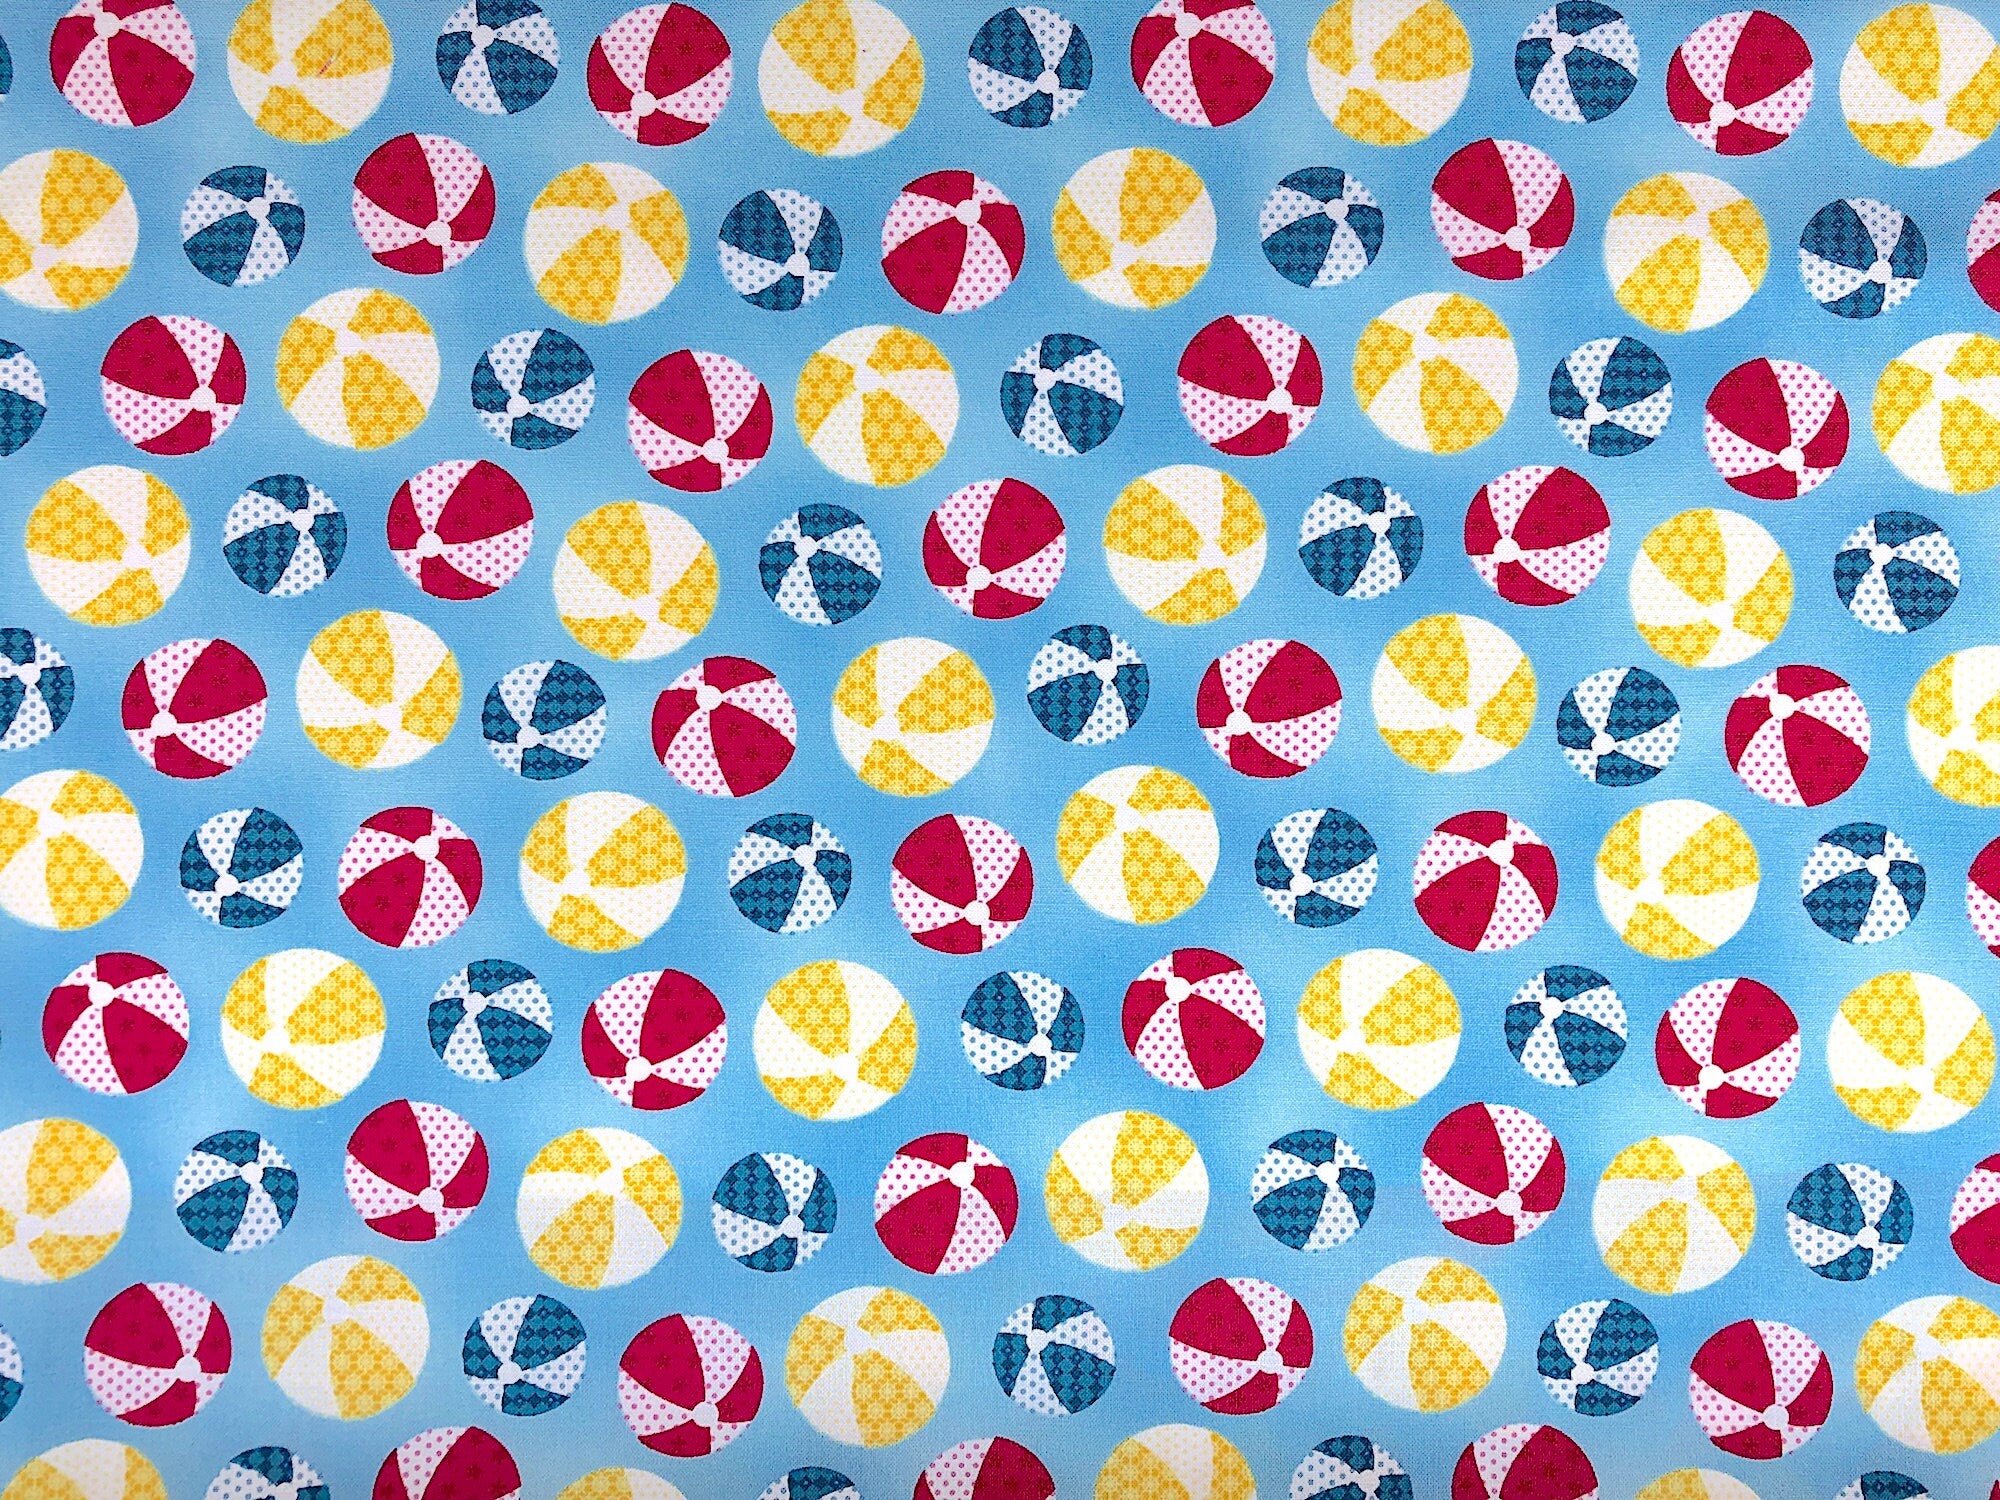 Beach Ball Fabric - Summer Fabric - Weekend Retreat - Cotton Fabric - Quilting Fabric - Henry Glass & Co. - MISC-65